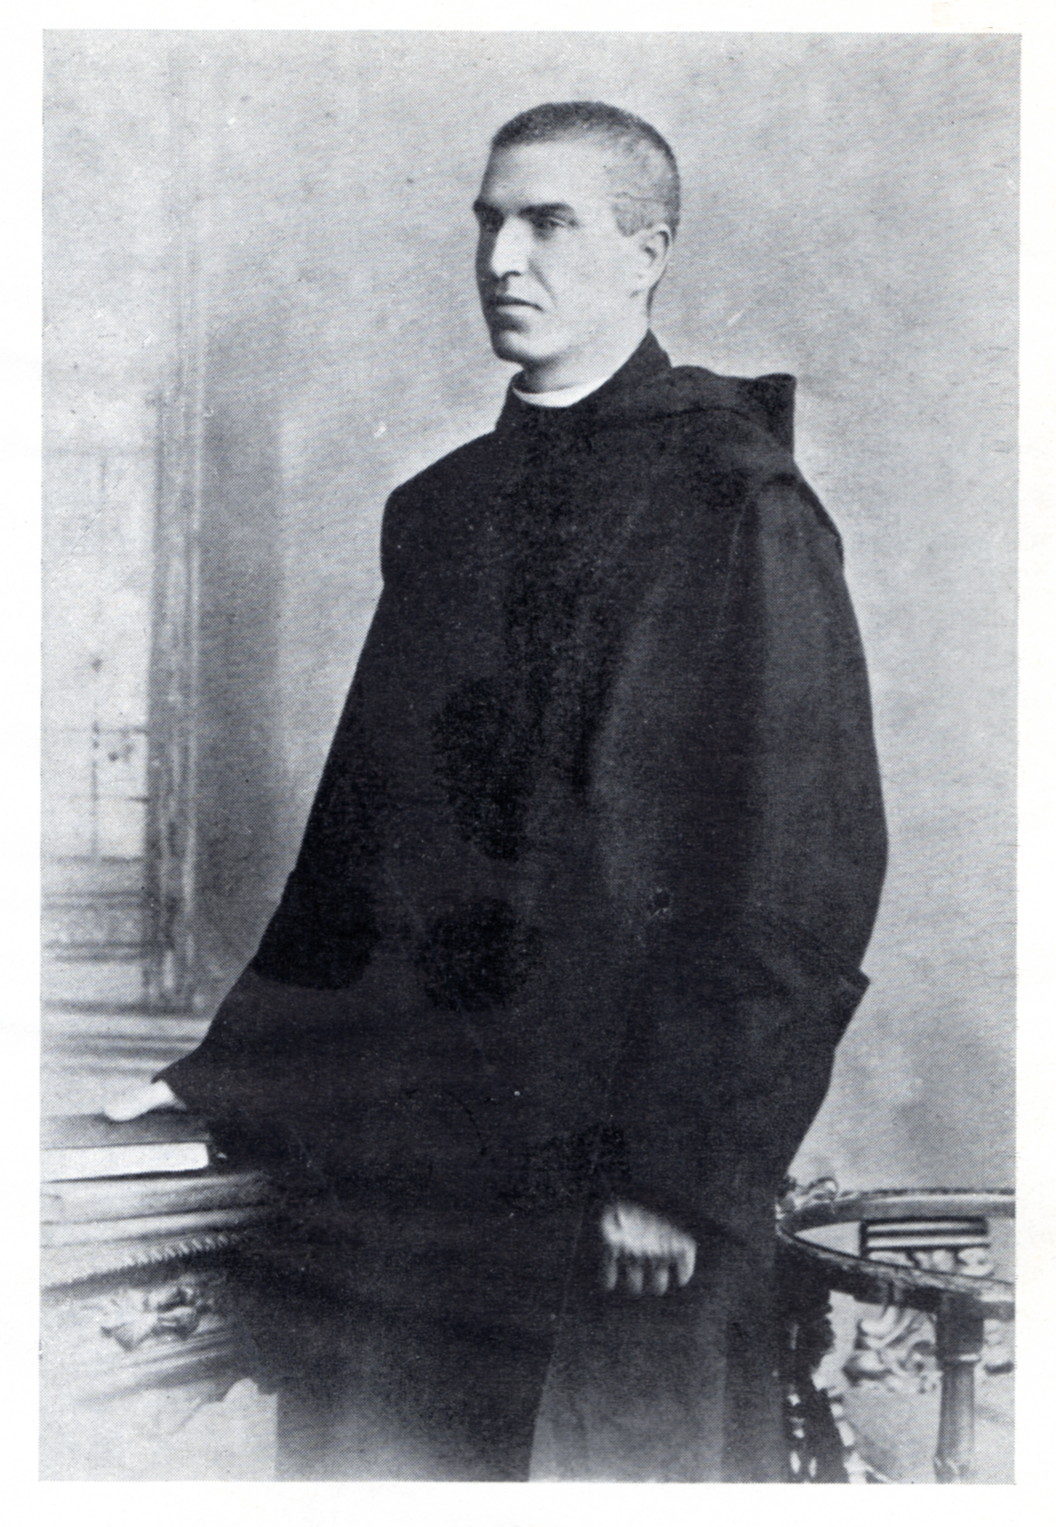 greyscale three-quarter-length photo\' of a stern-looking, crop-haired young man wearing dark robes